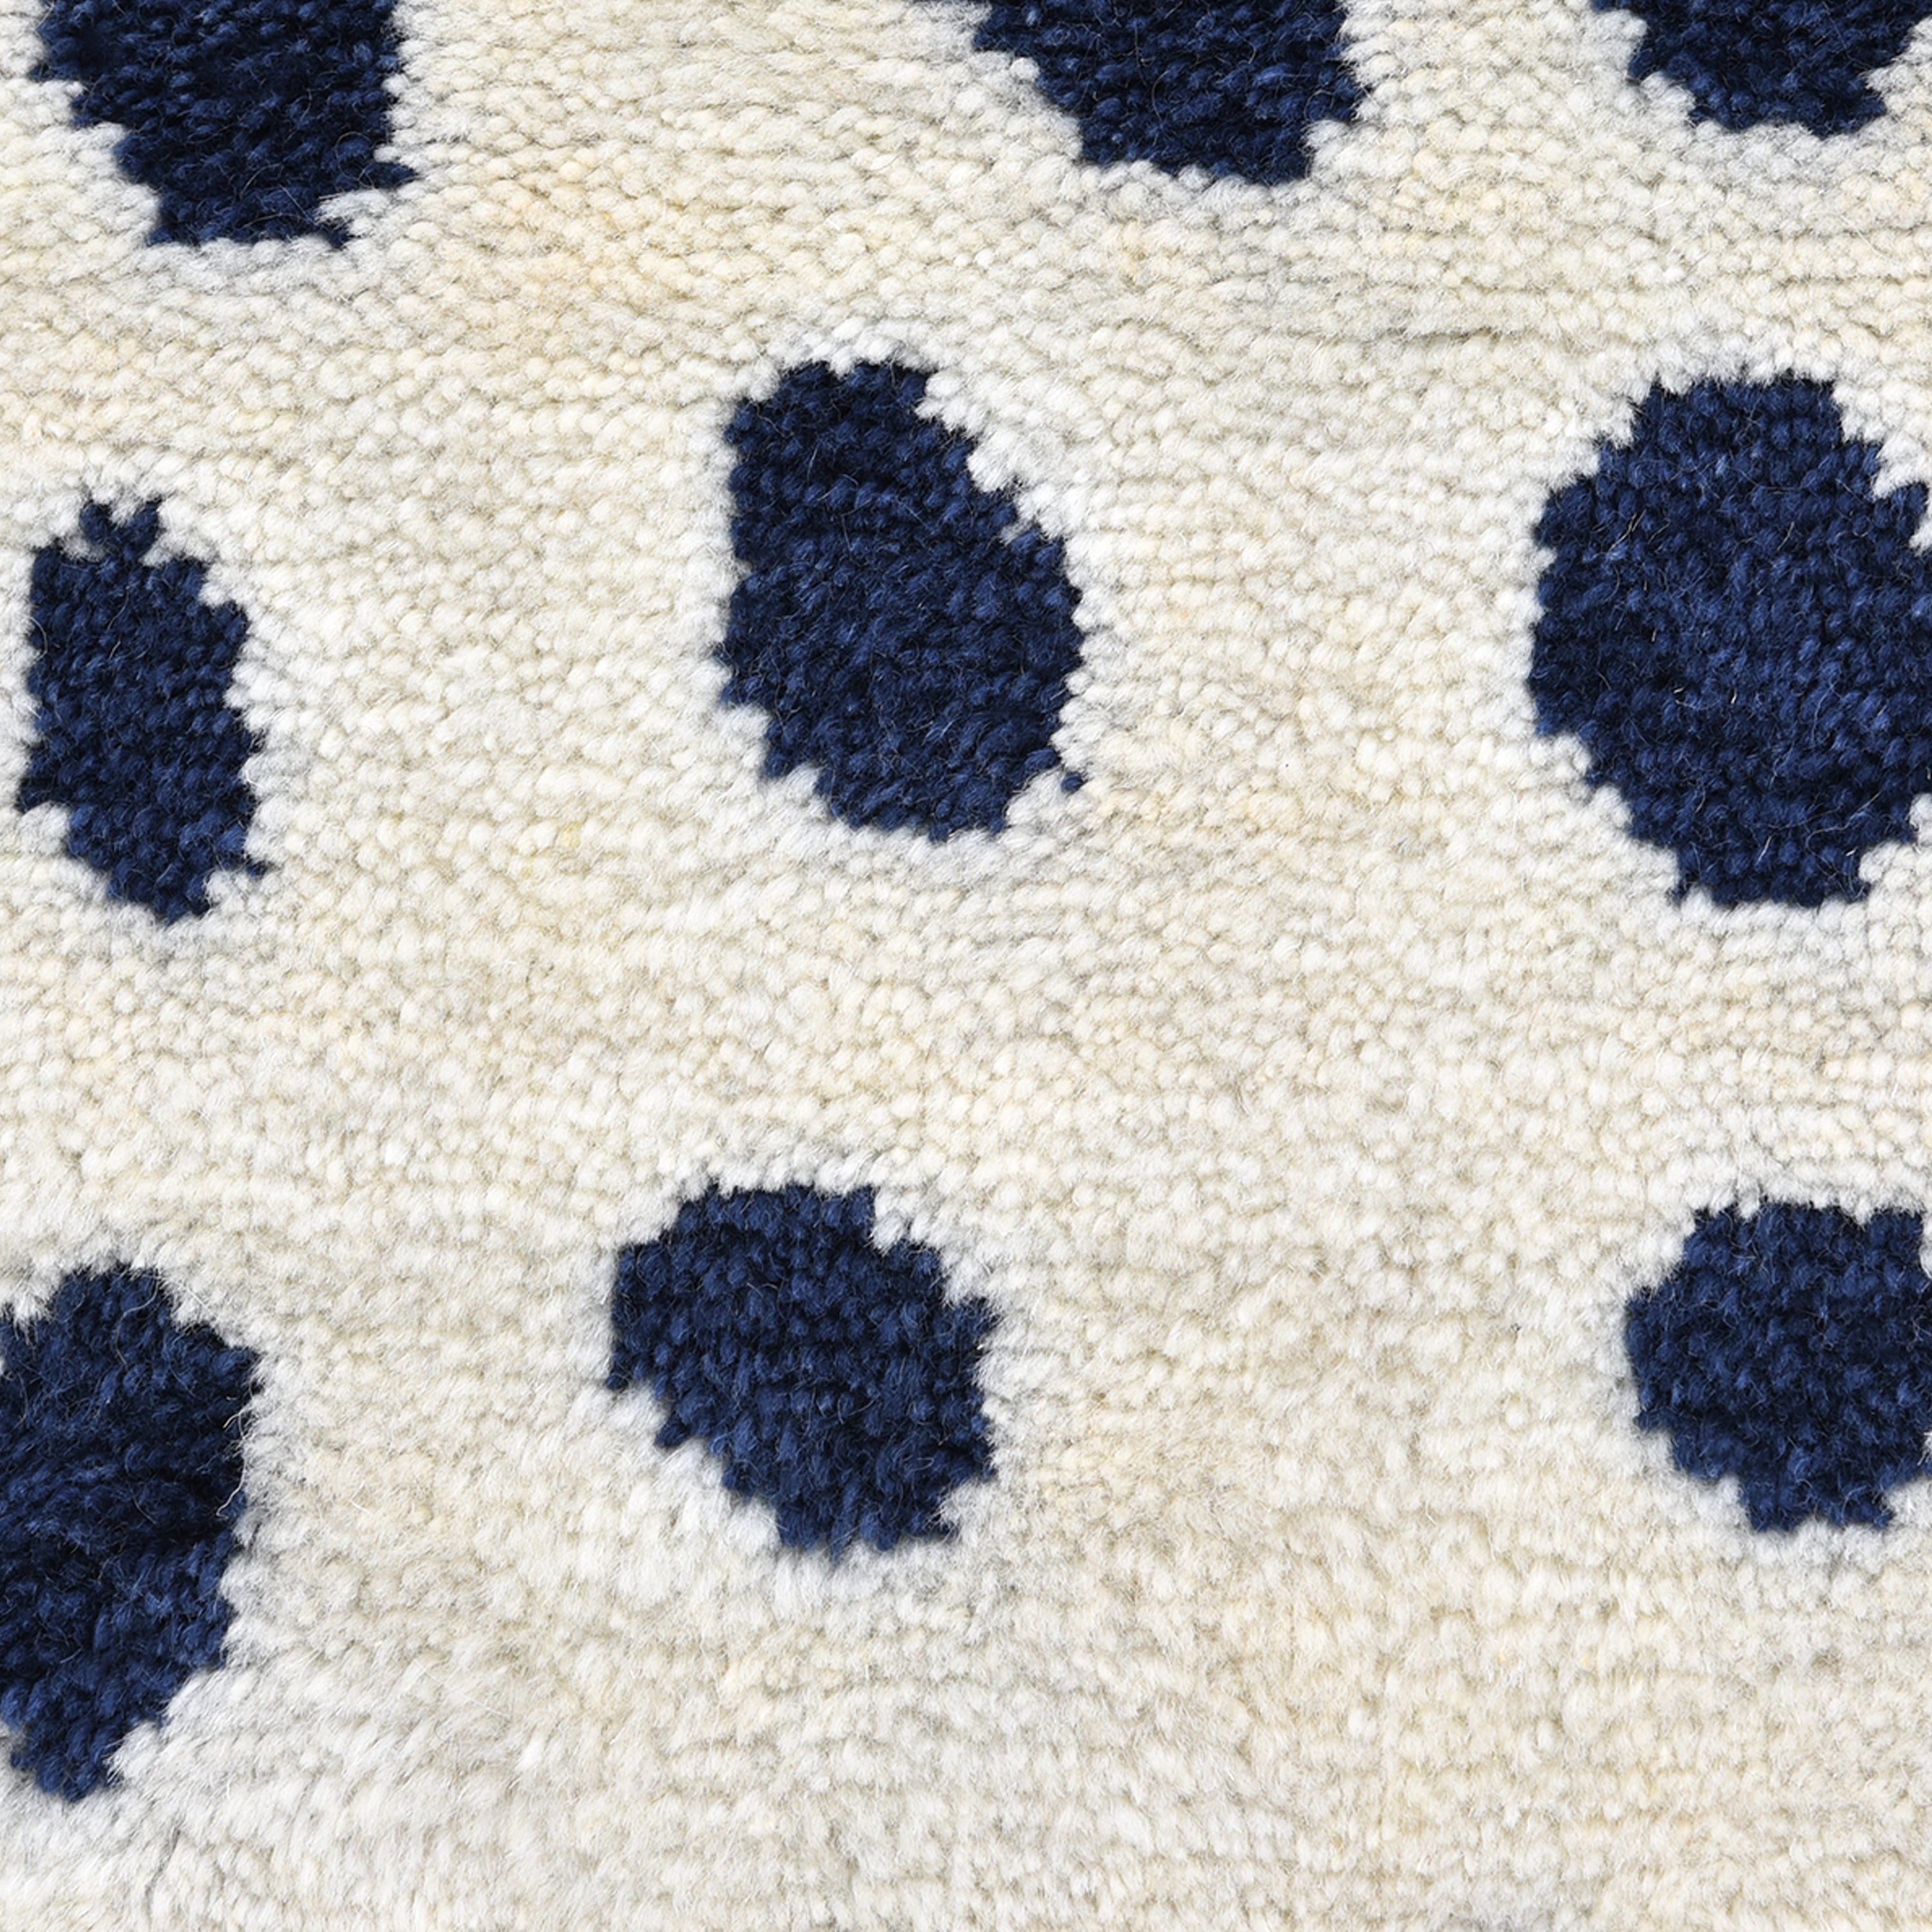 Ivory and Blue Contemporary Wool Cotton Blend Rug - 8' x 10'